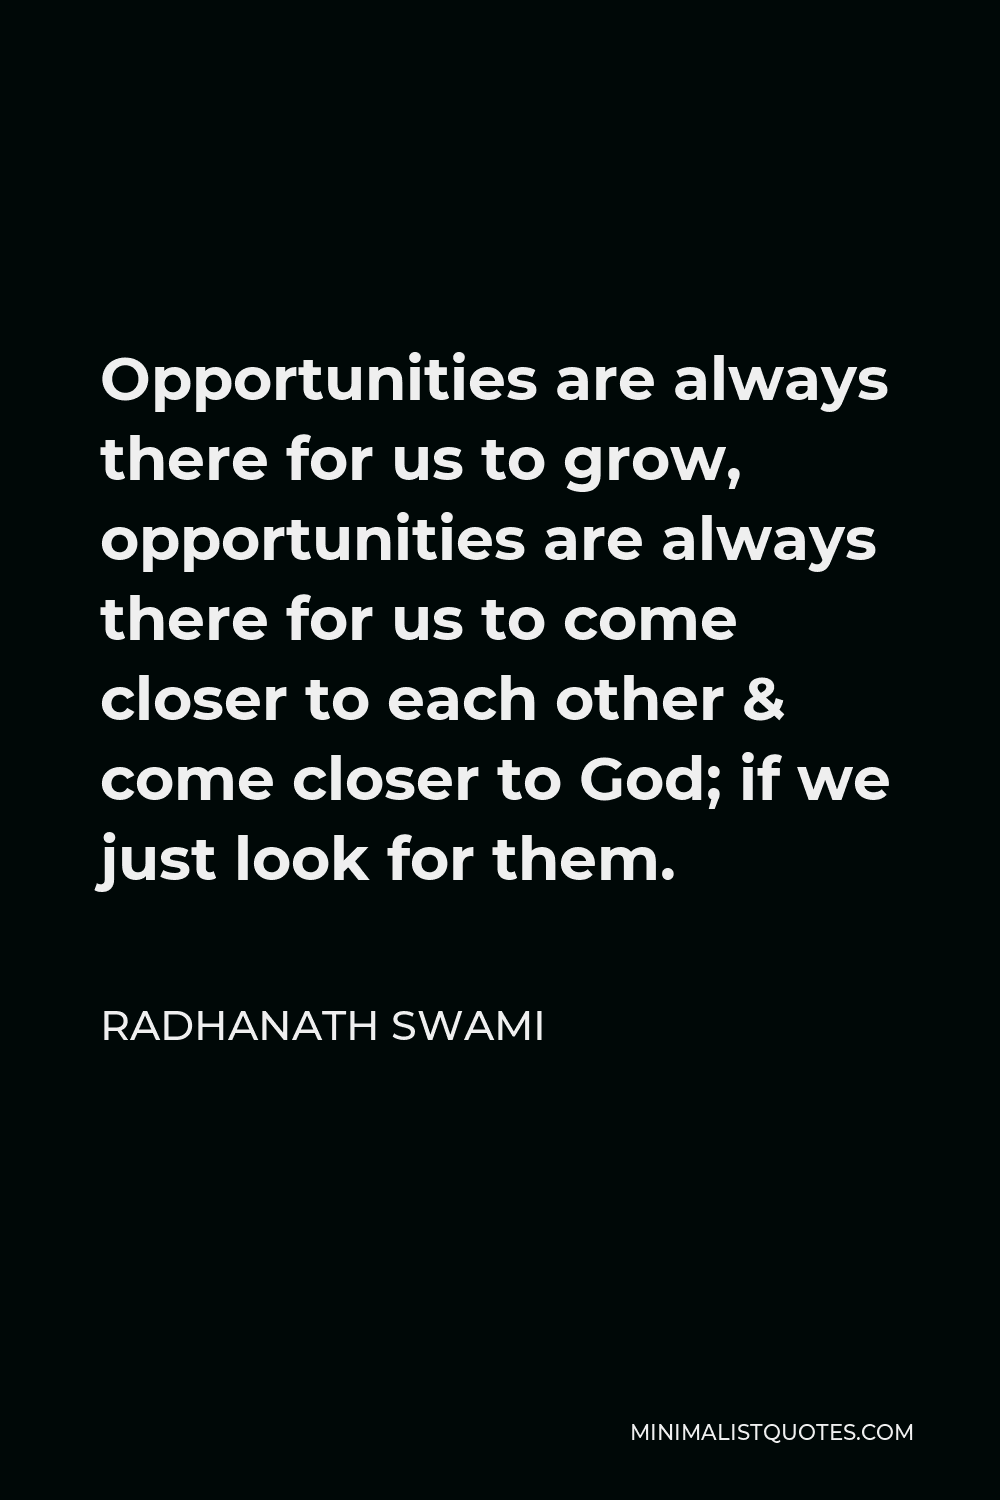 Radhanath Swami Quote - Opportunities are always there for us to grow, opportunities are always there for us to come closer to each other & come closer to God; if we just look for them.